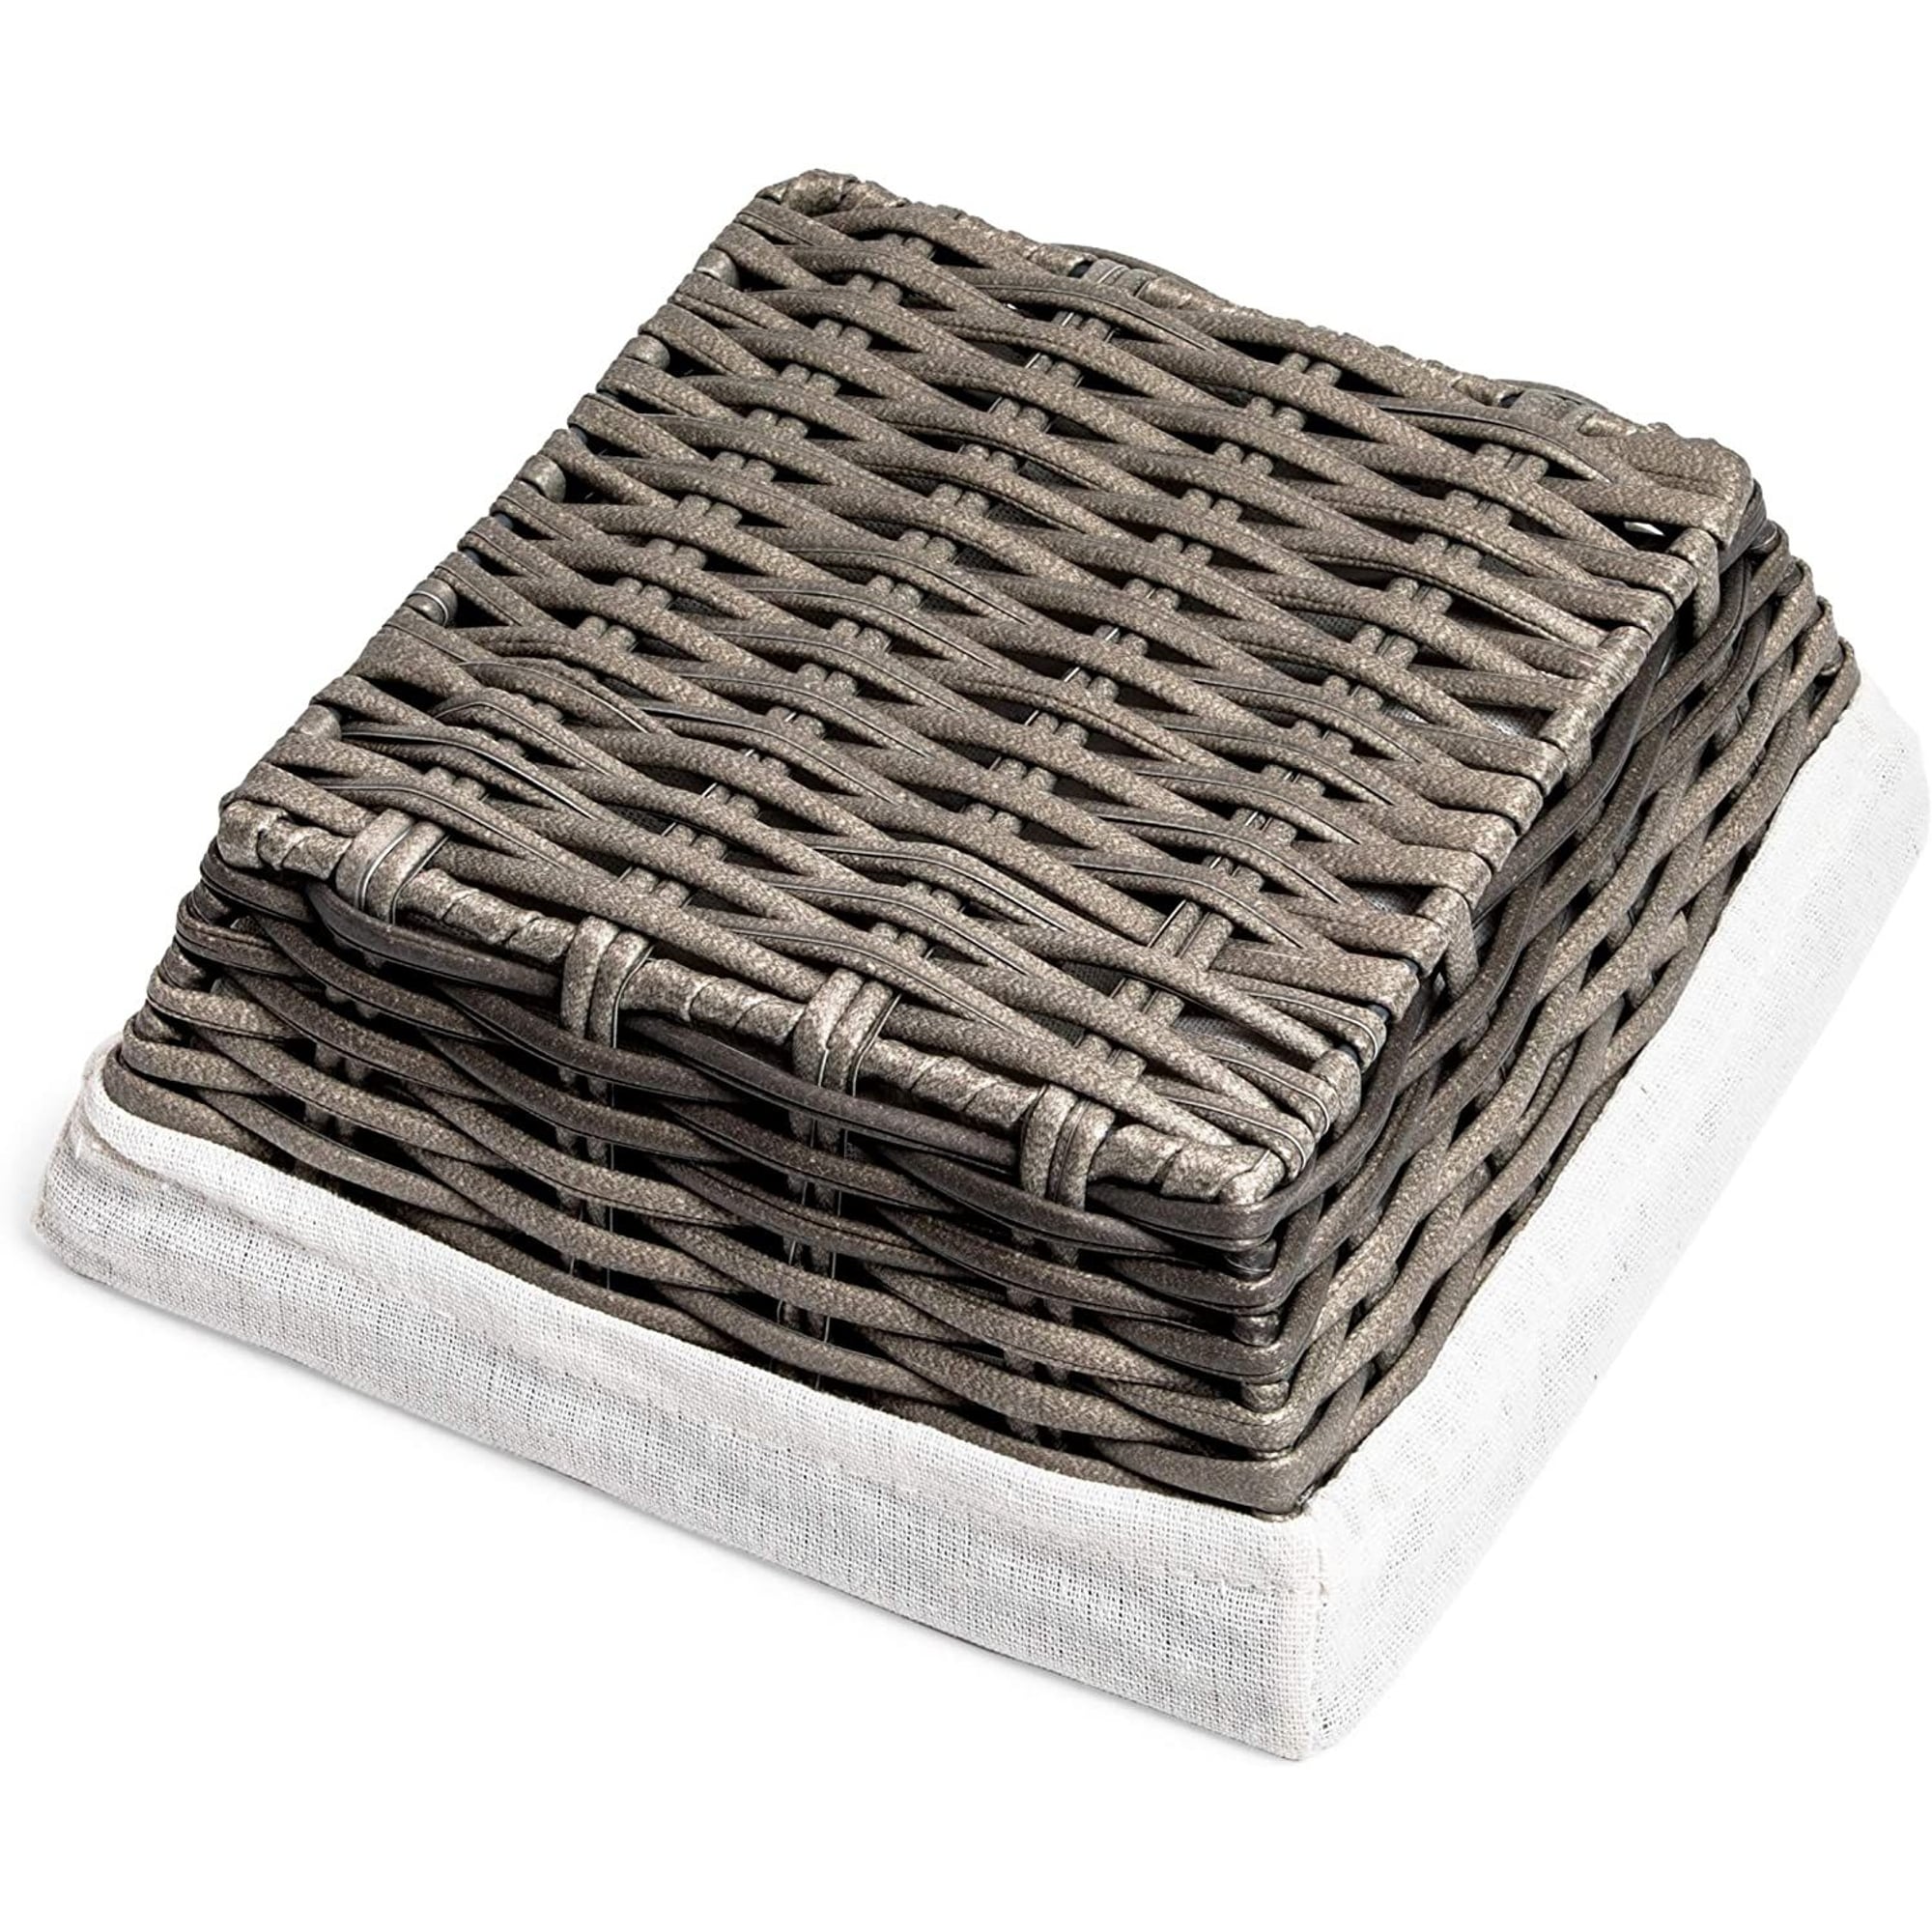 https://ak1.ostkcdn.com/images/products/is/images/direct/92f094864db0b362255186440469ef362d0f54f9/Farmlyn-Creek-Square-Wicker-Storage-Baskets-with-Liners-%289-x-9-x-3.5-Inches%2C-3-Pack%29.jpg